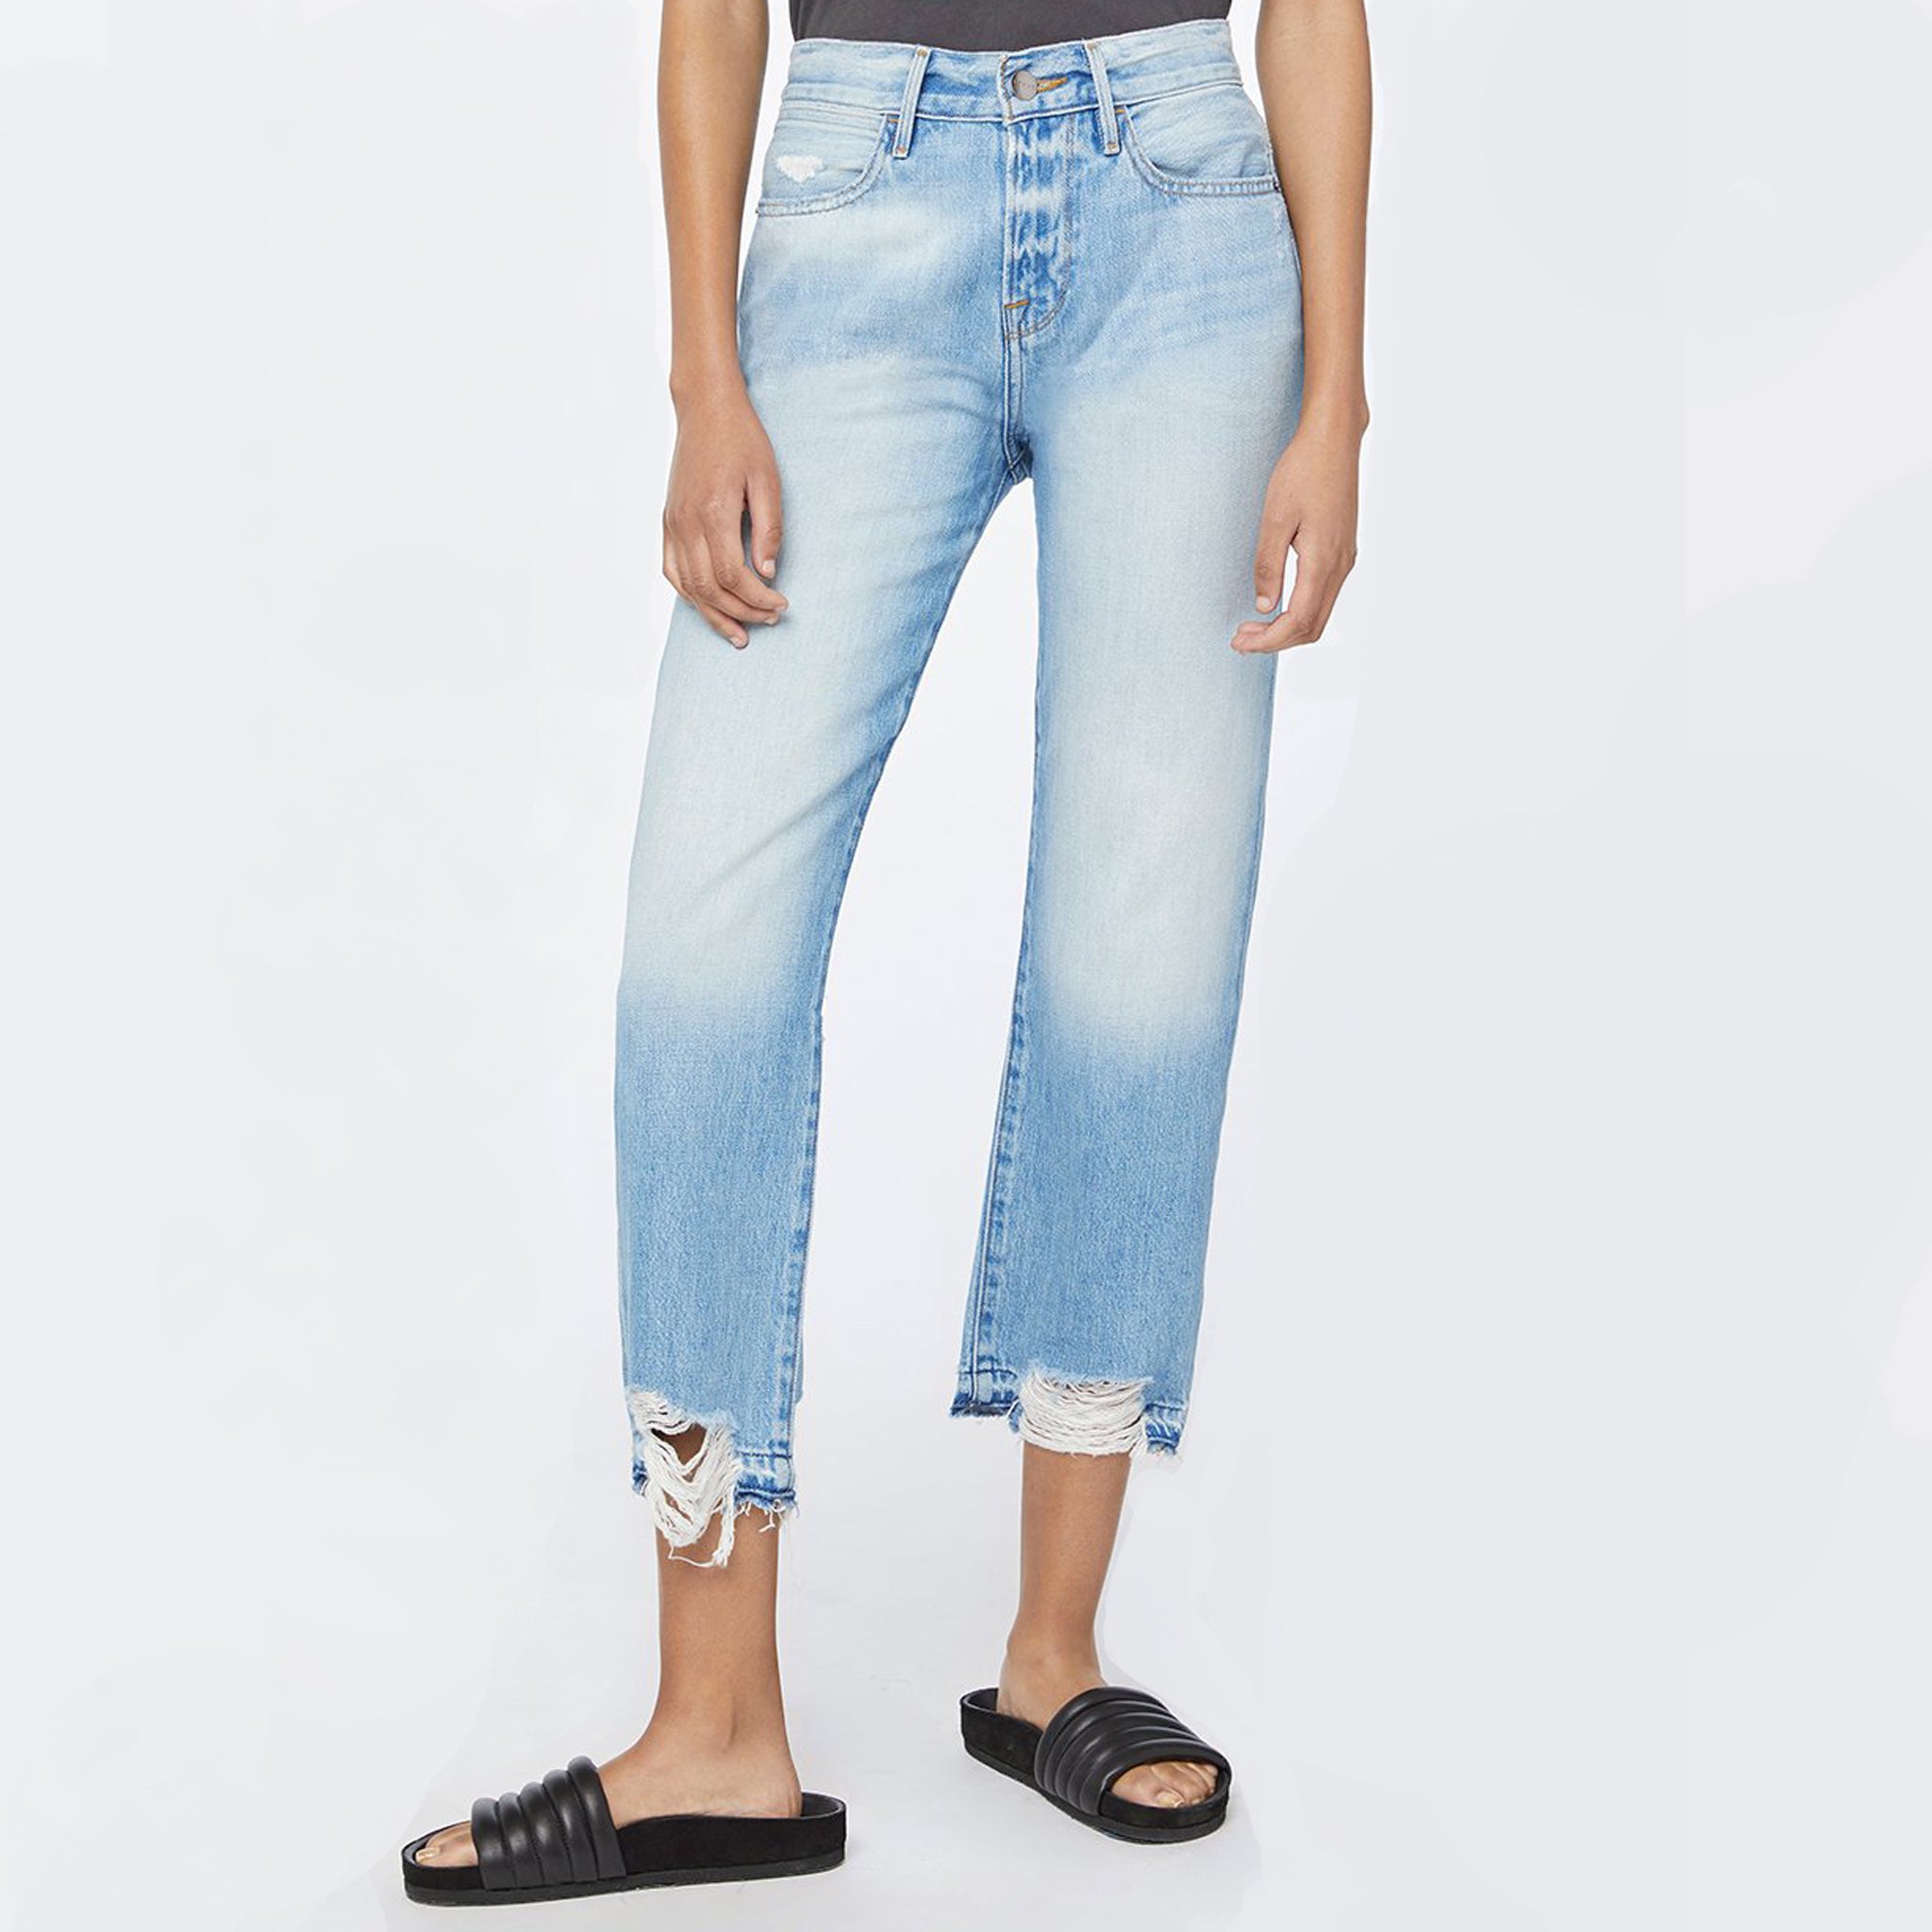 The Hollywood Crop jean by Frame 